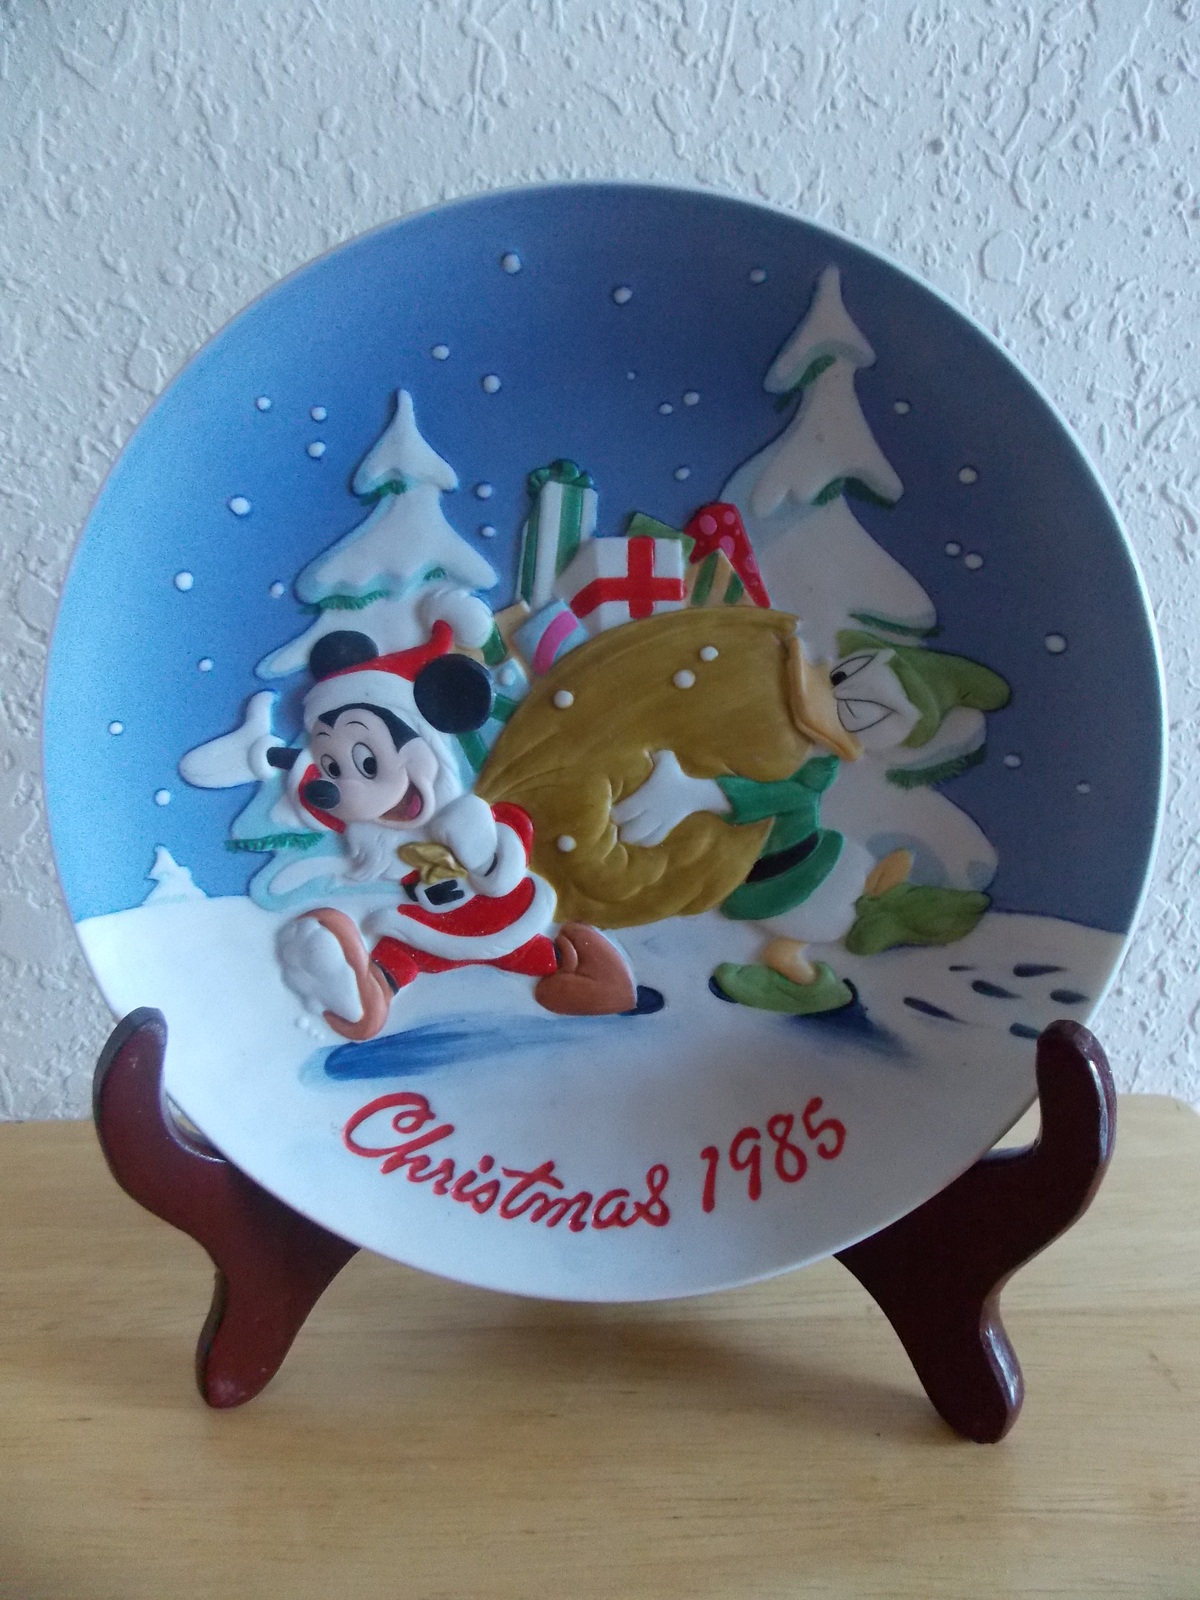 1985 Disney Collection Mickey and Donald “Santa’s Helpers” Collector’s Plate  - $25.00